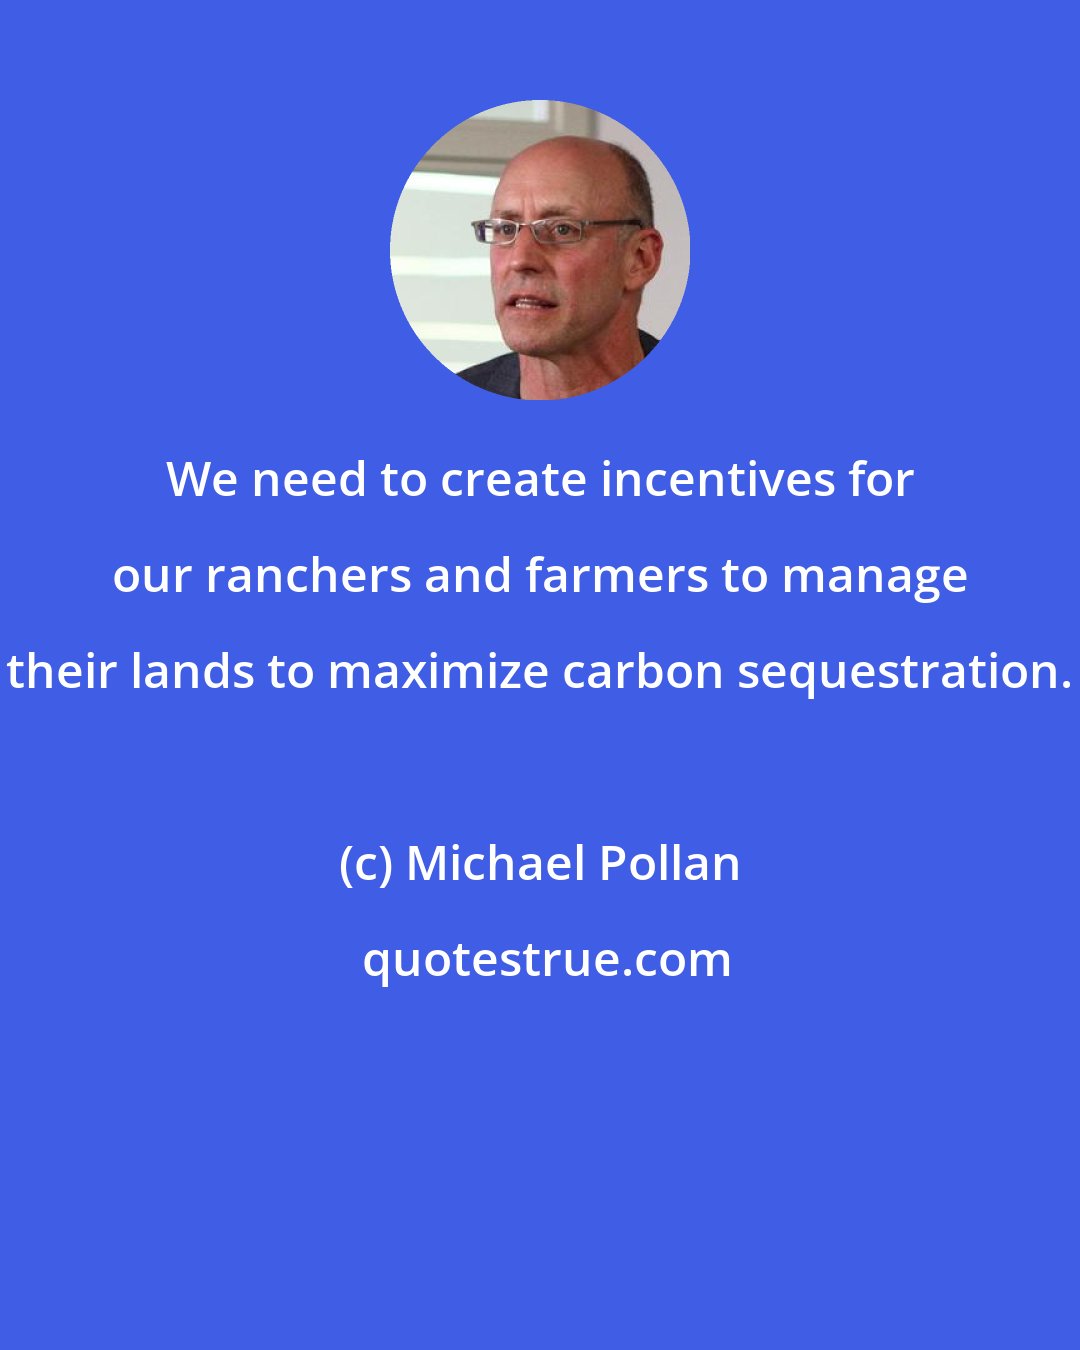 Michael Pollan: We need to create incentives for our ranchers and farmers to manage their lands to maximize carbon sequestration.